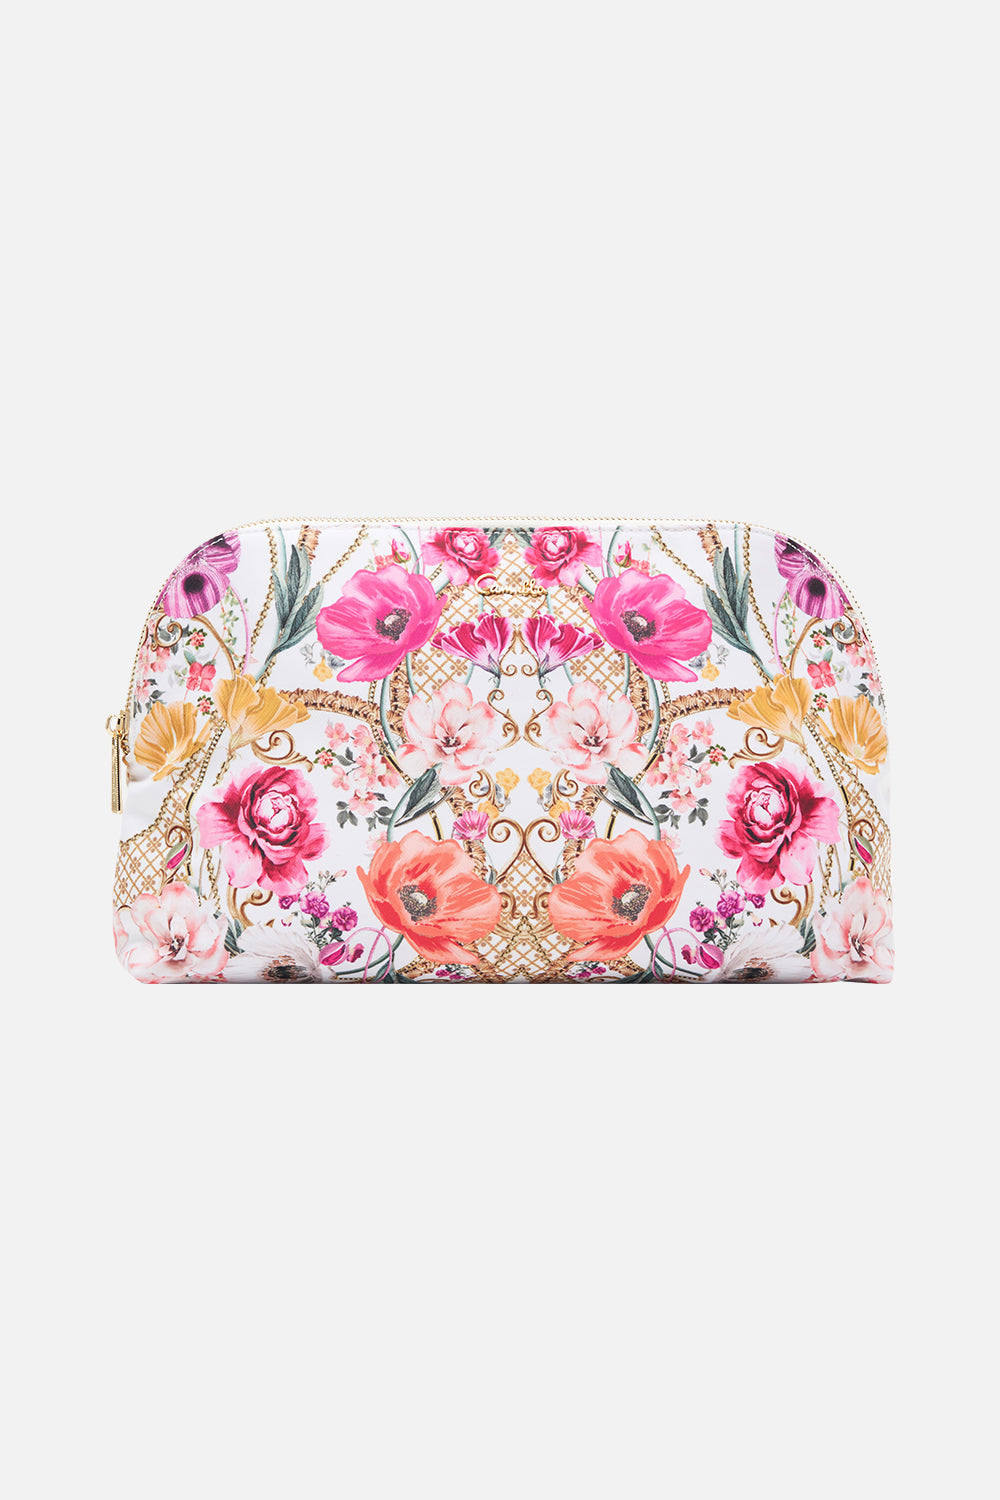 CAMILLA Large Cosmetic Case - Destiny Calling - Magpie Style